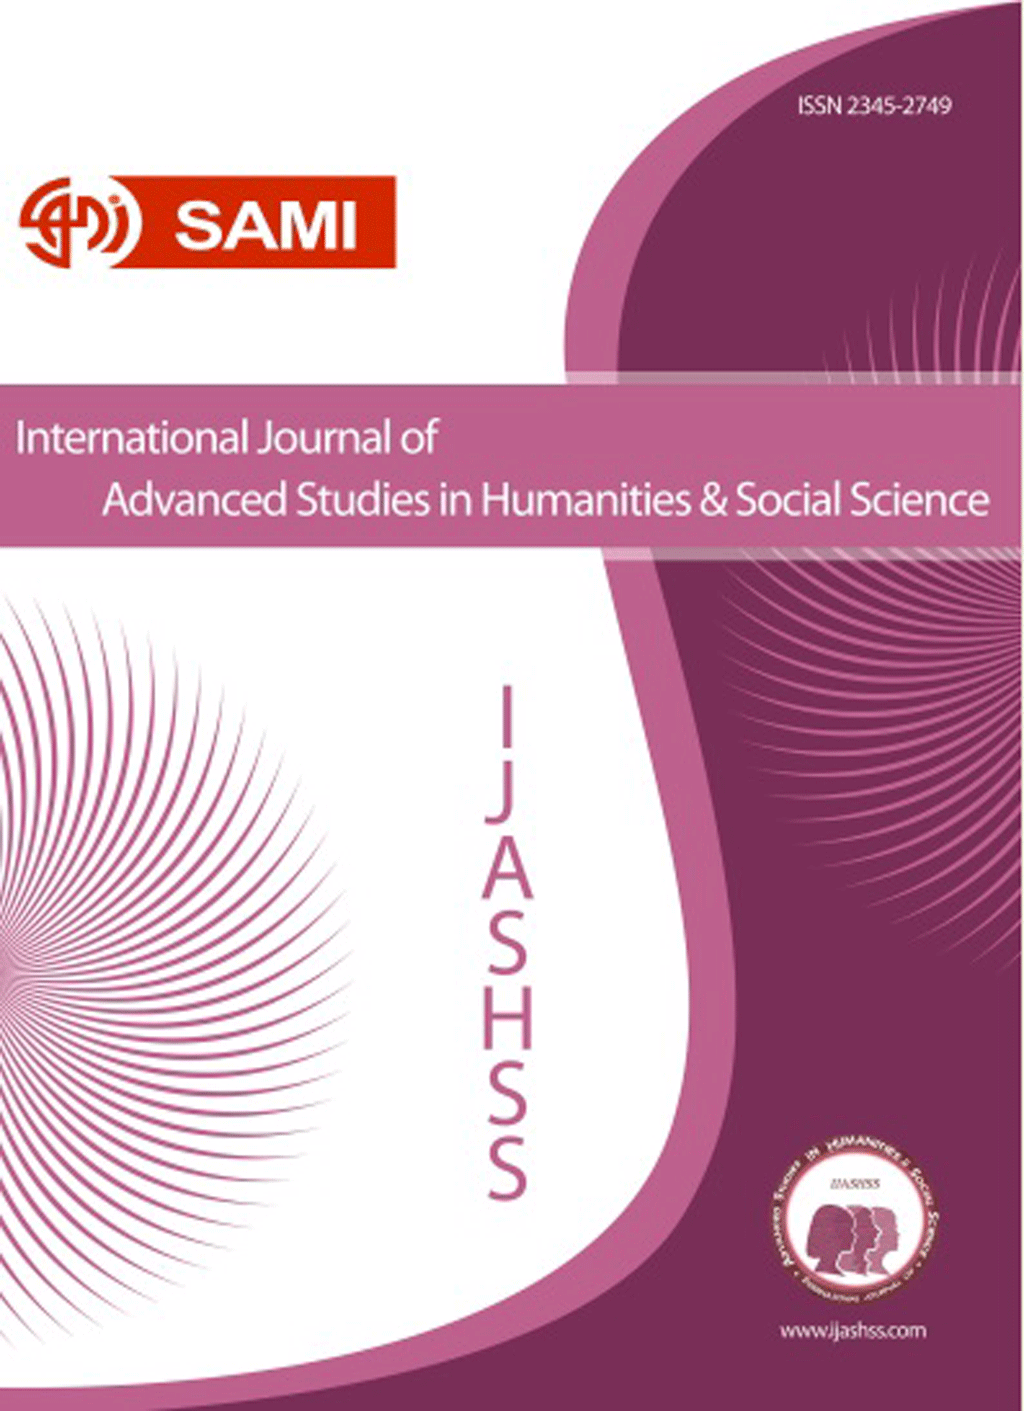 International Journal of Advanced Studies in Humanities and Social Science - January 2018, Volume 7 -  Issue 1